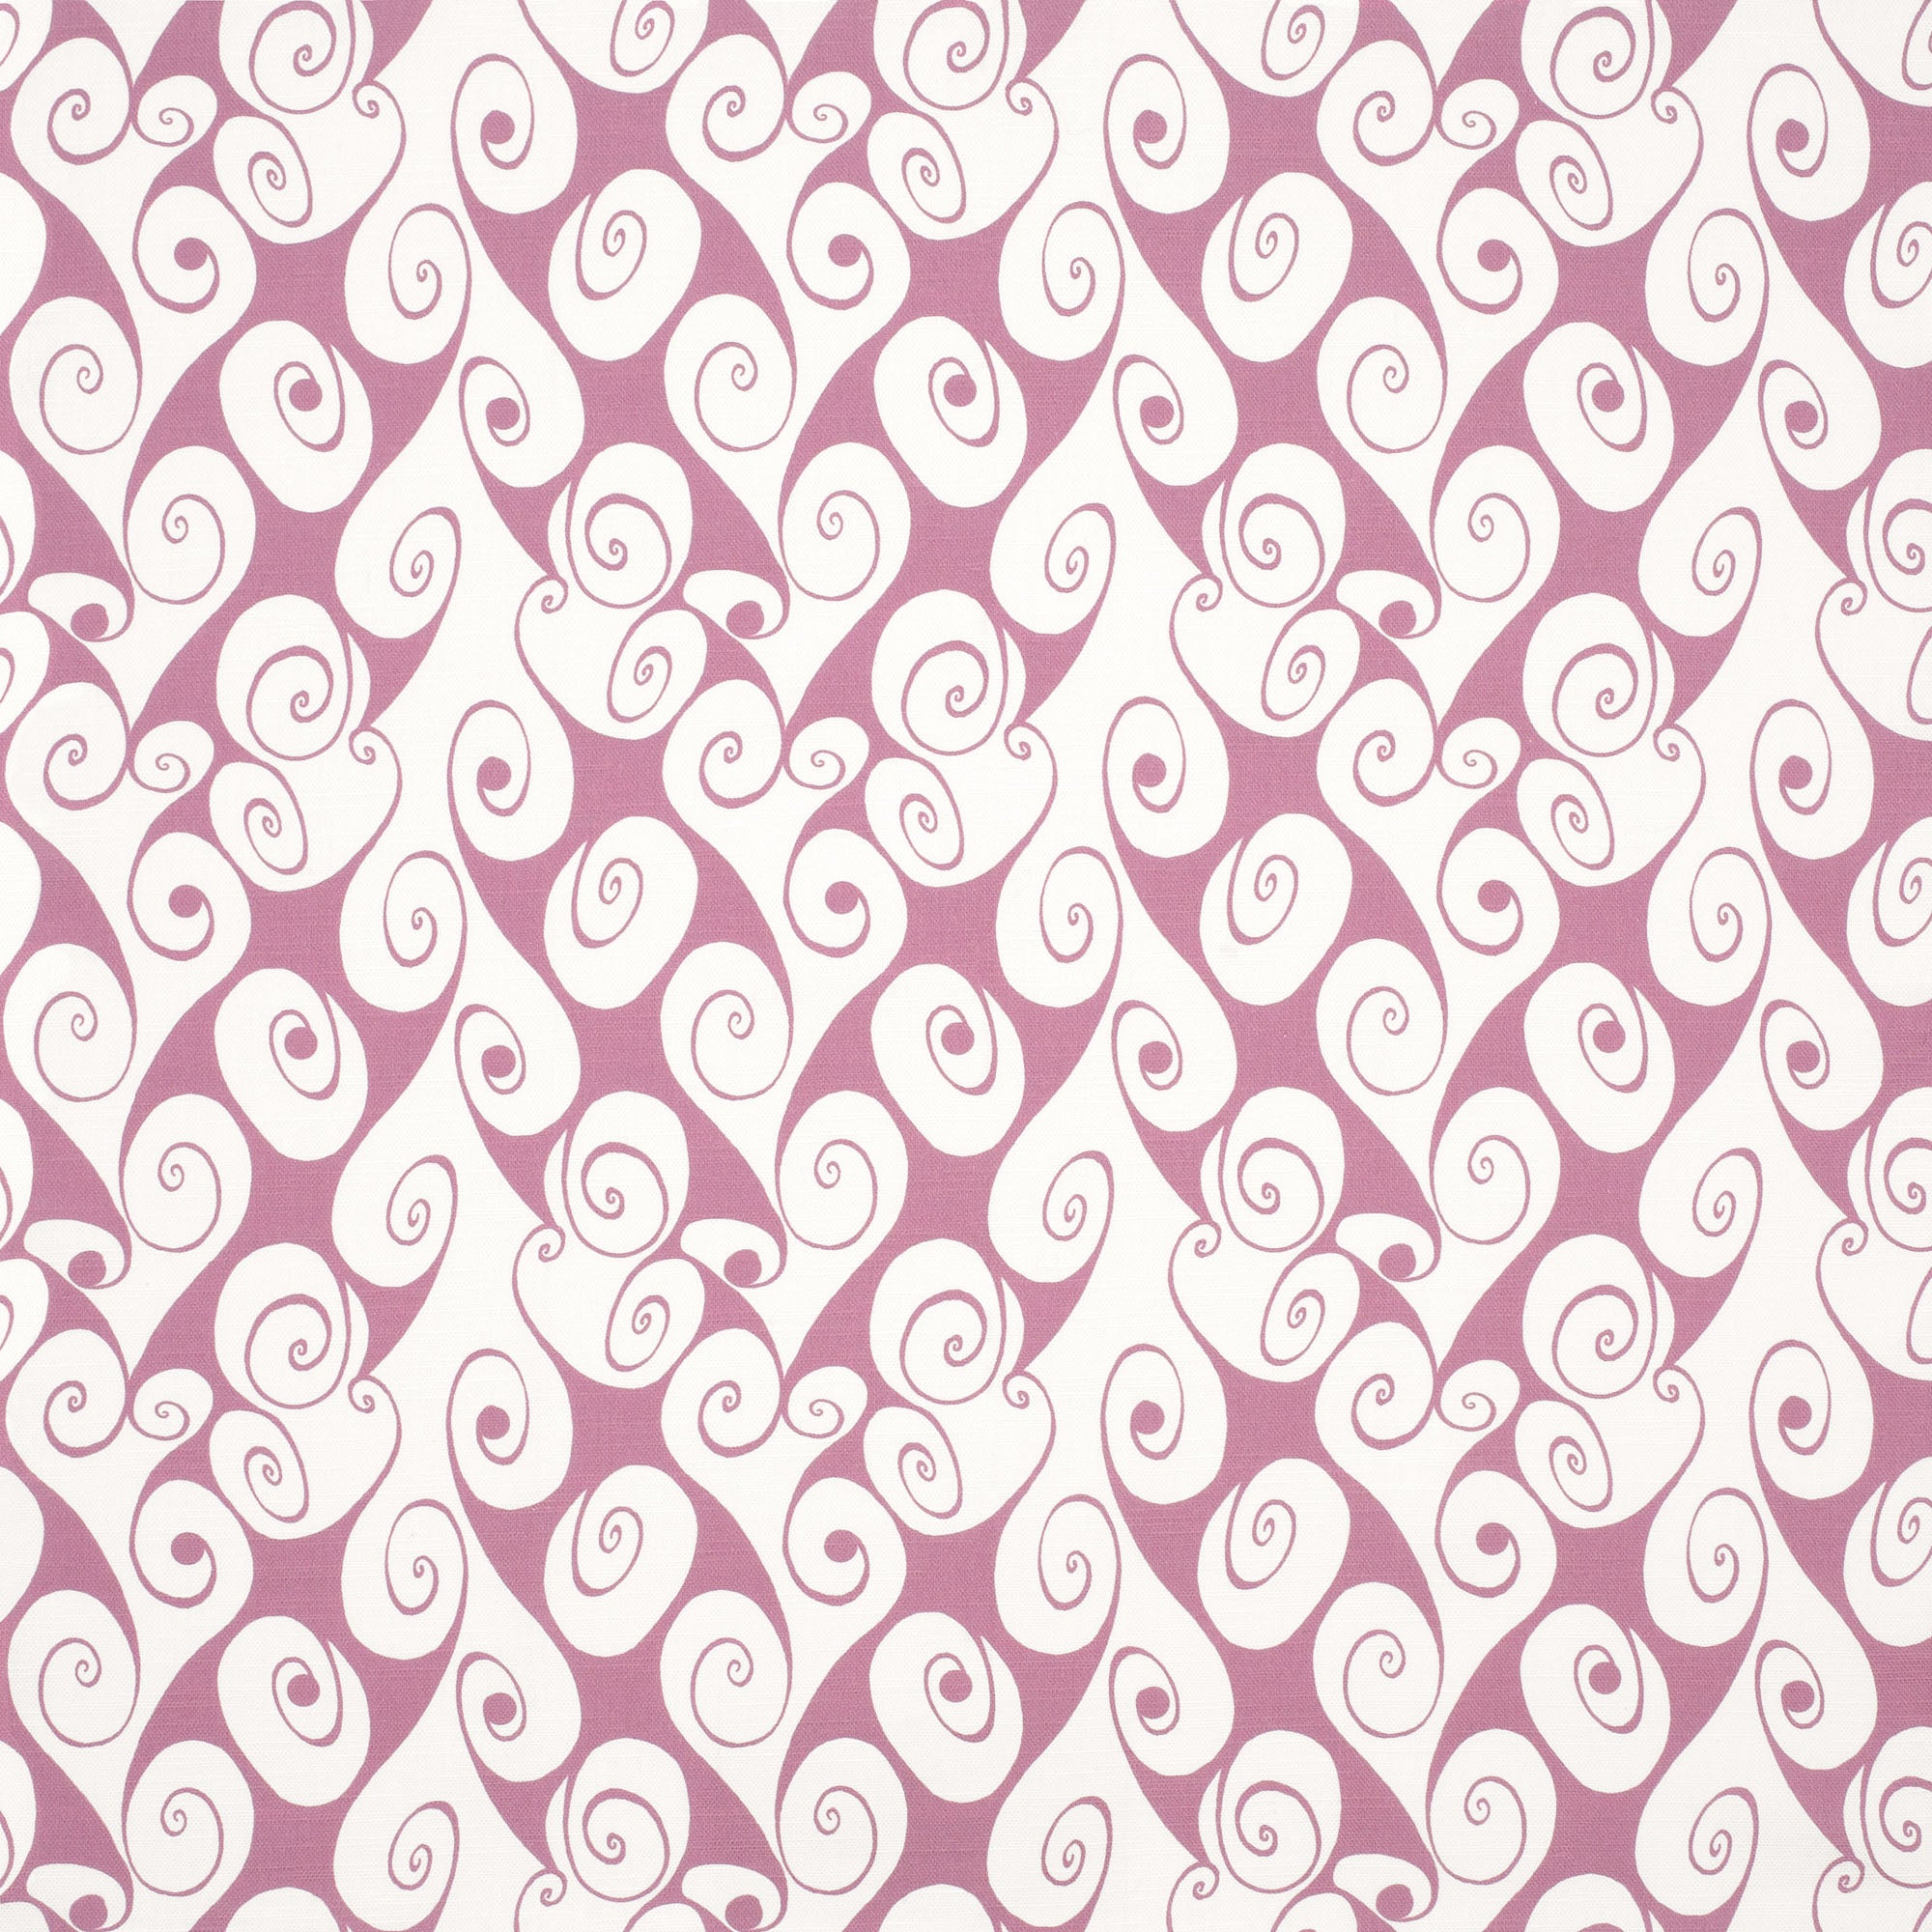 Detail of fabric in a playful abstract shape print in white on a purple field.